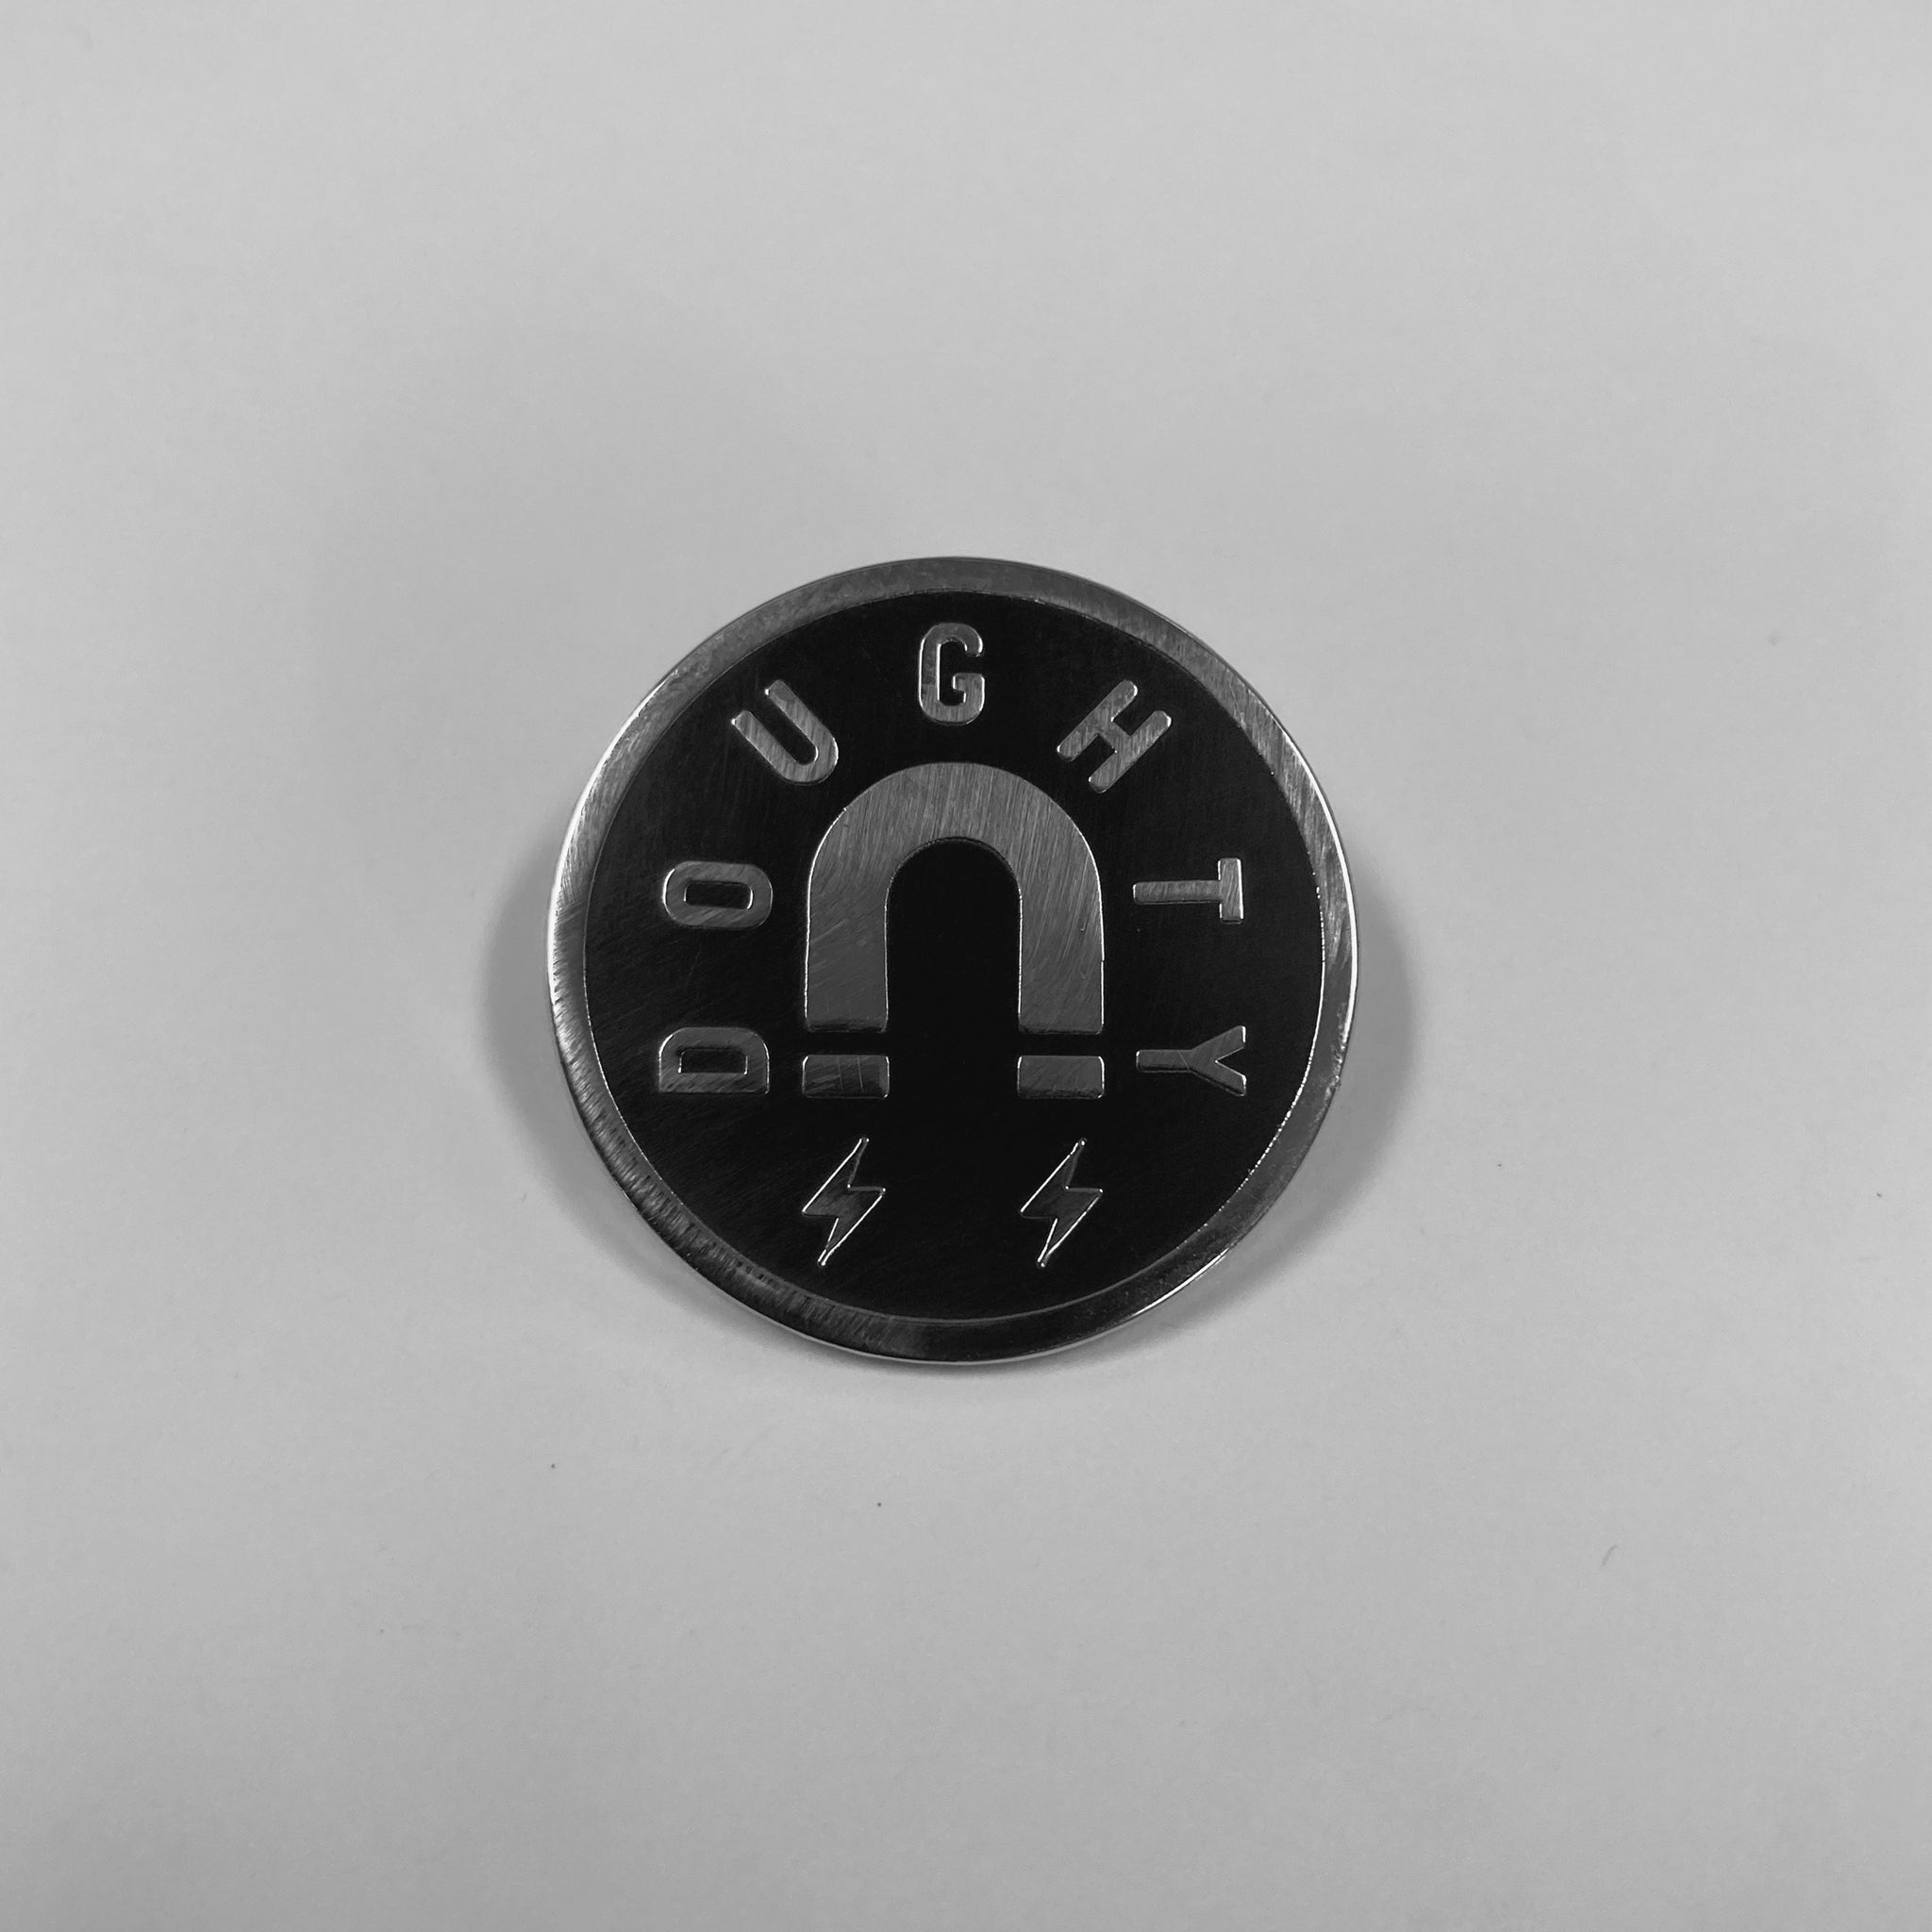 Magnet Collector's Pin